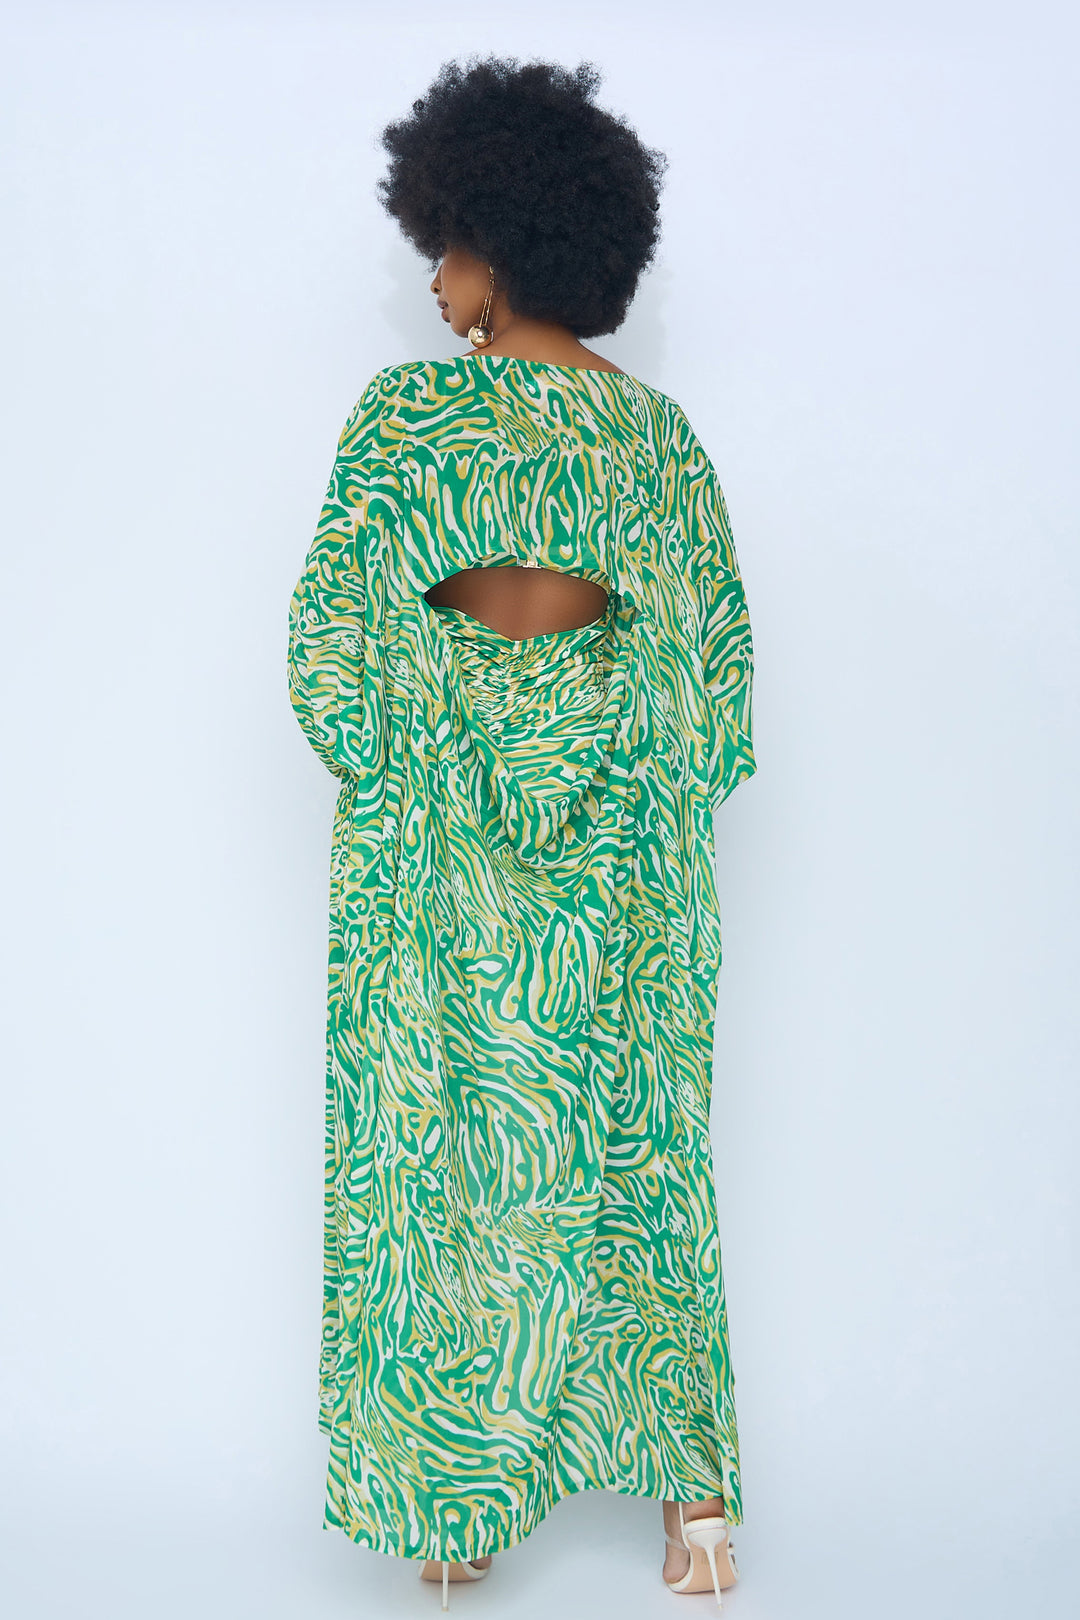 BREATHLESS MOMENTS COVERUP - GREEN PRINT